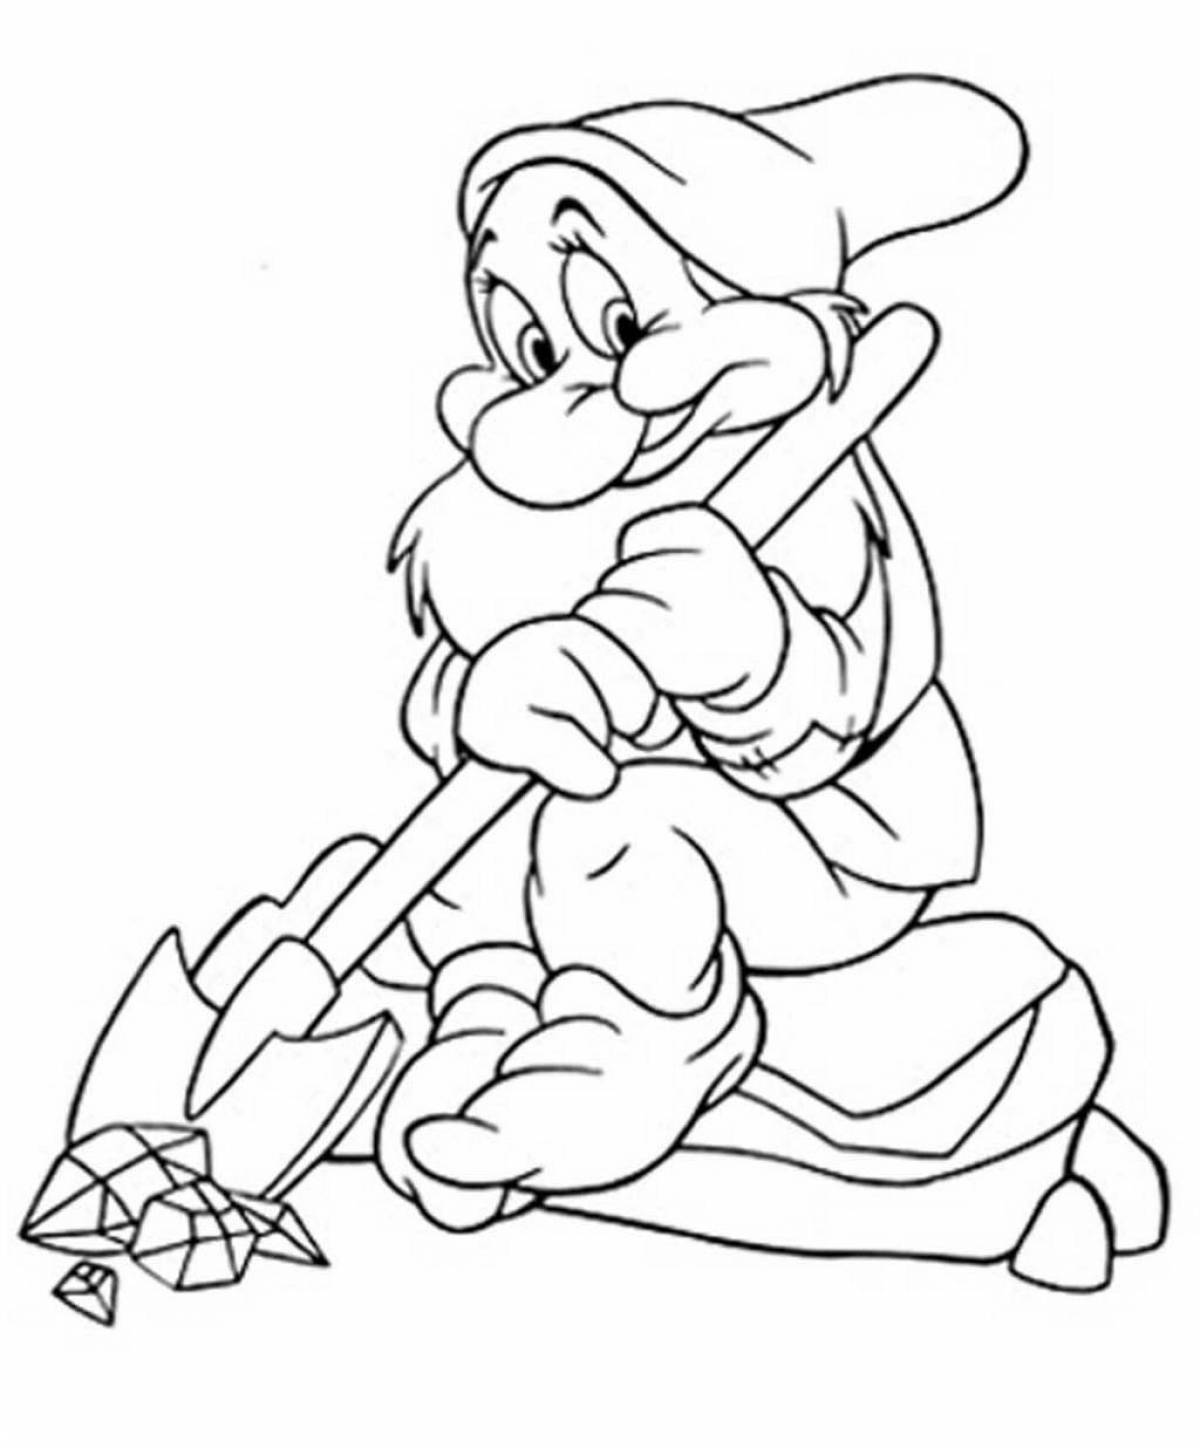 Dwarf coloring pages